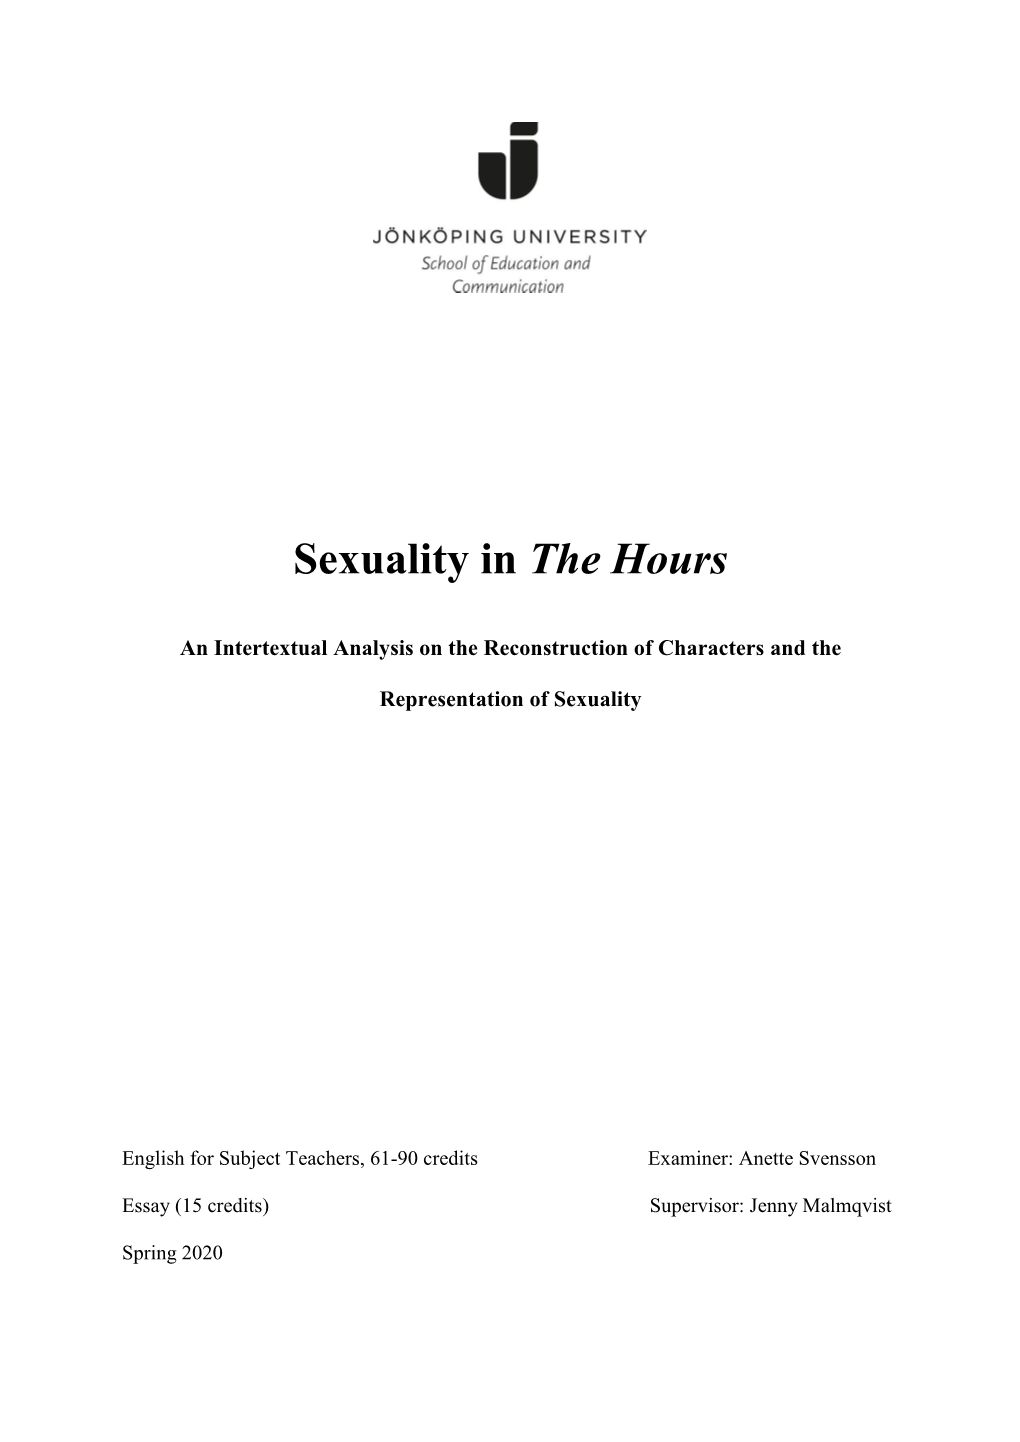 Sexuality in the Hours